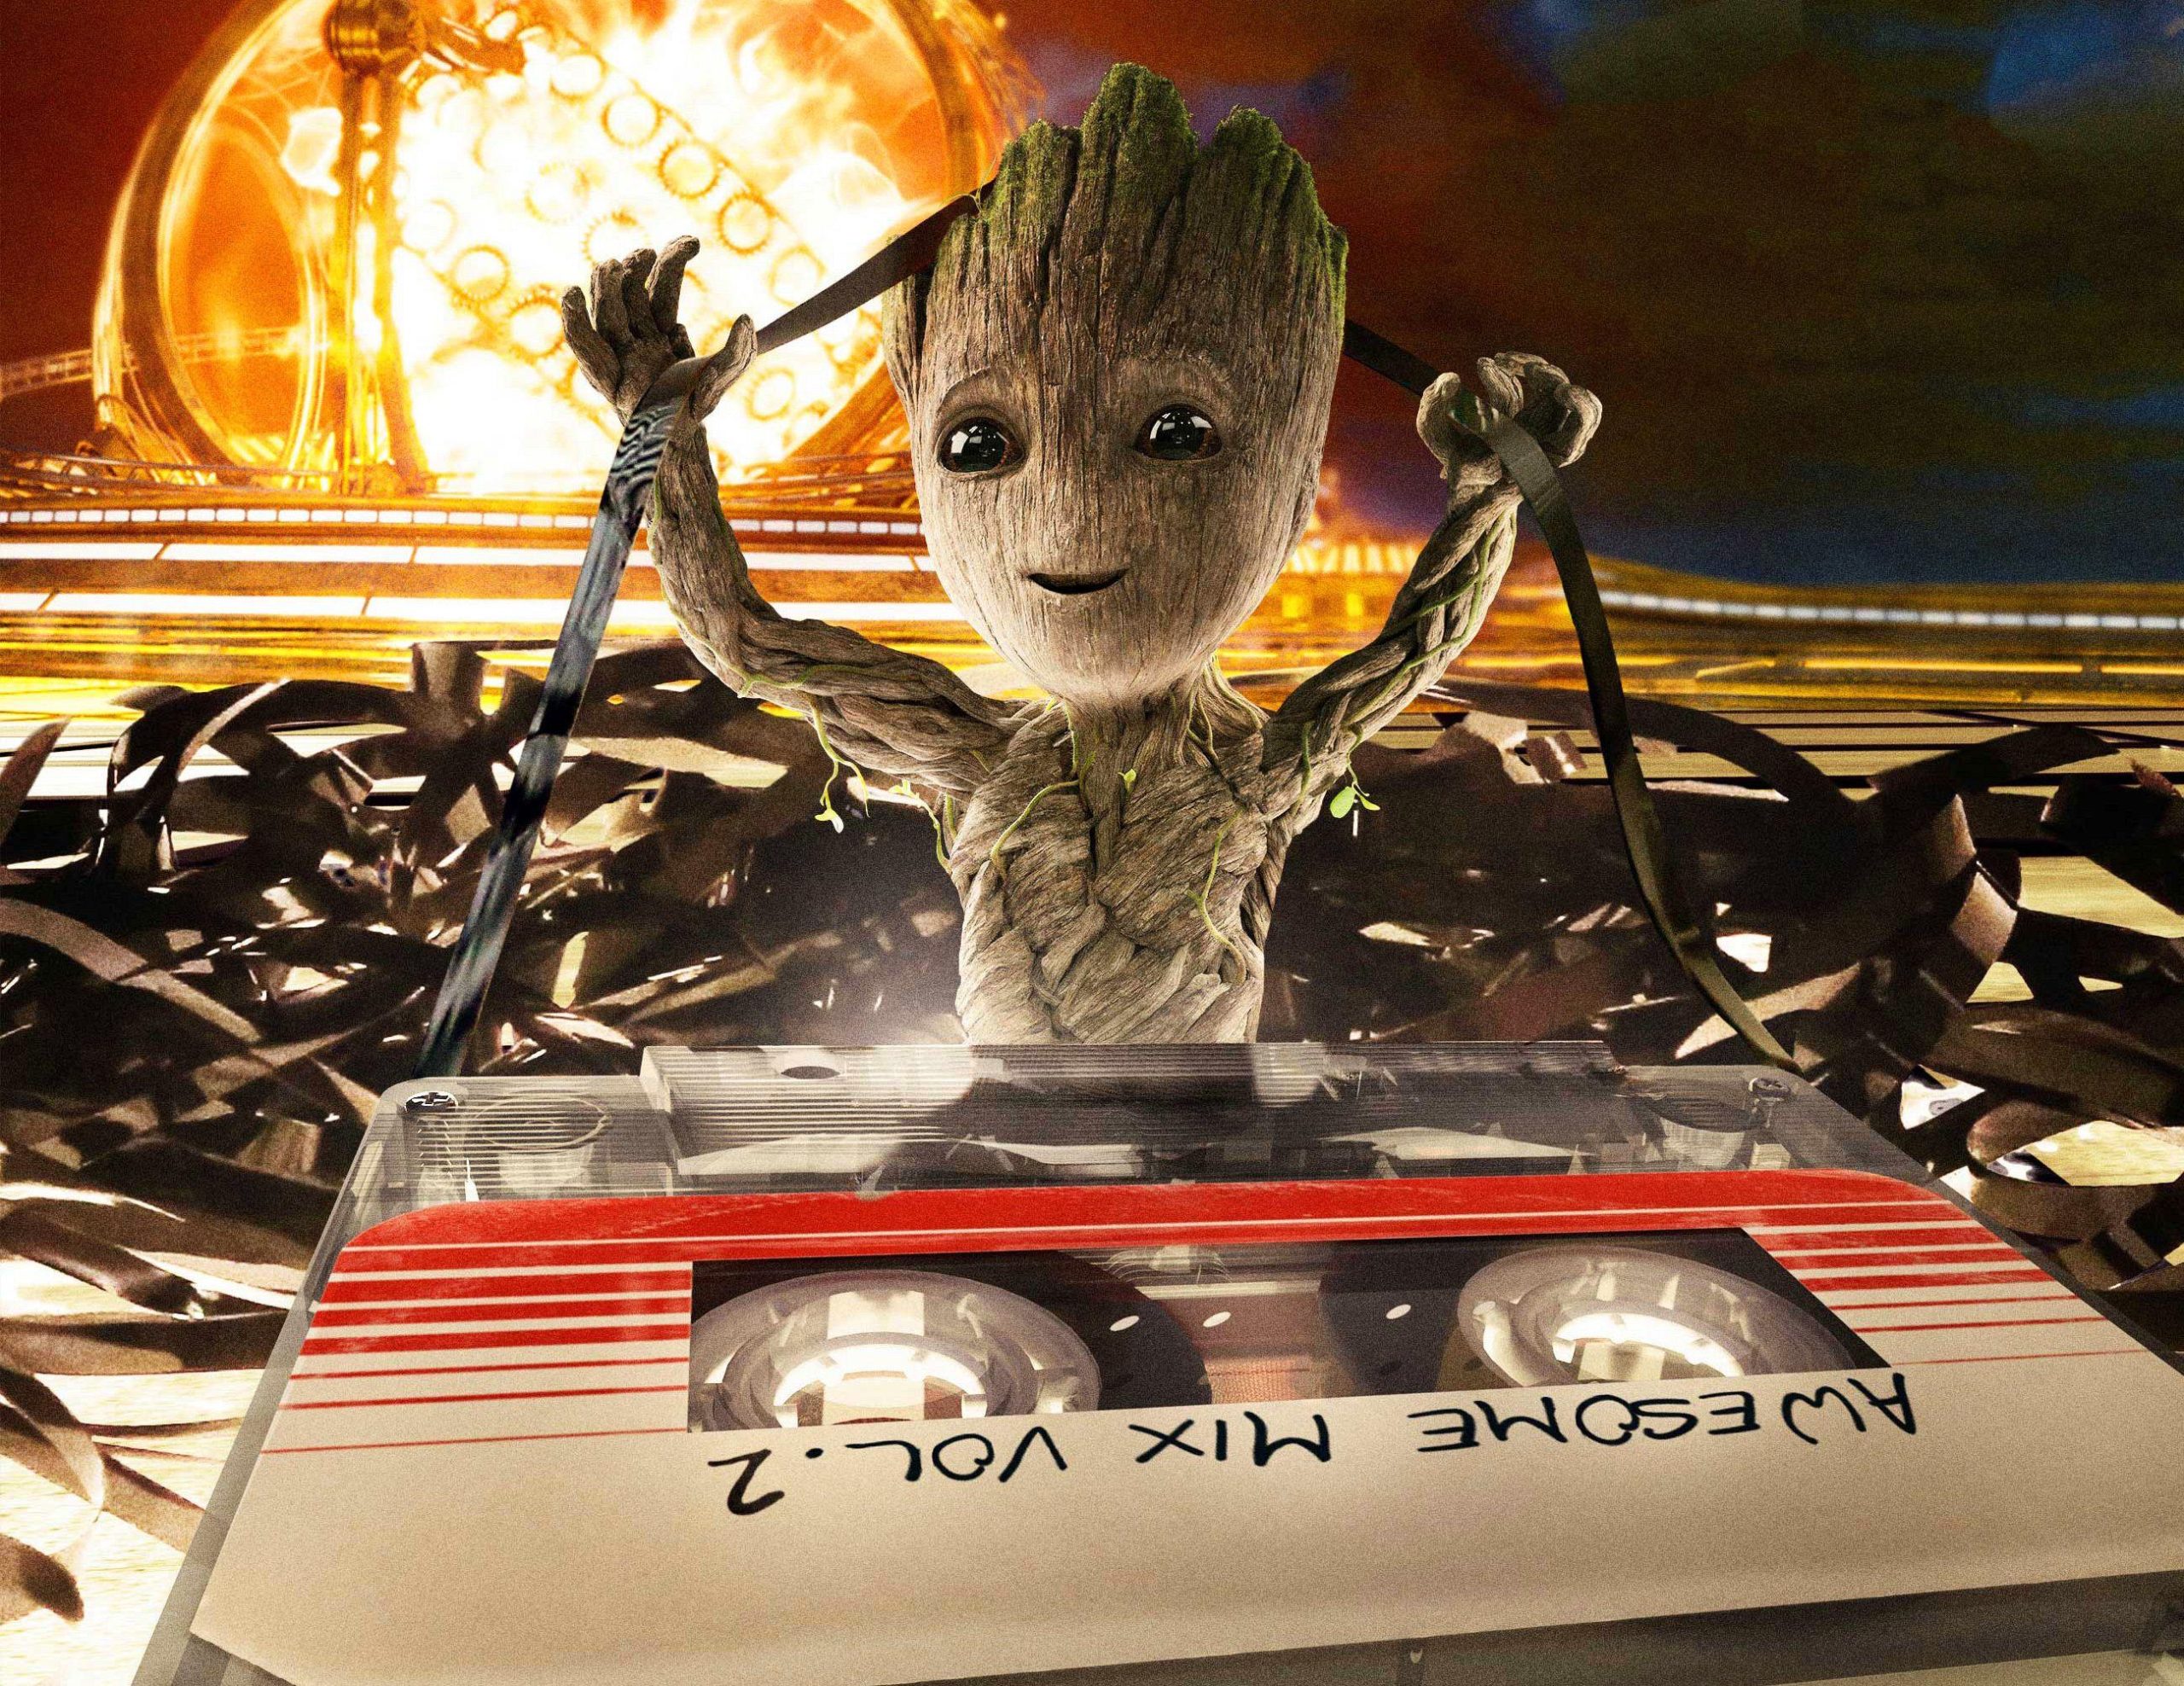 Cute Baby Groot Guardians Of The Galaxy Wallpaper, Cute Baby Groot Guardians Of The Galaxy, Movies